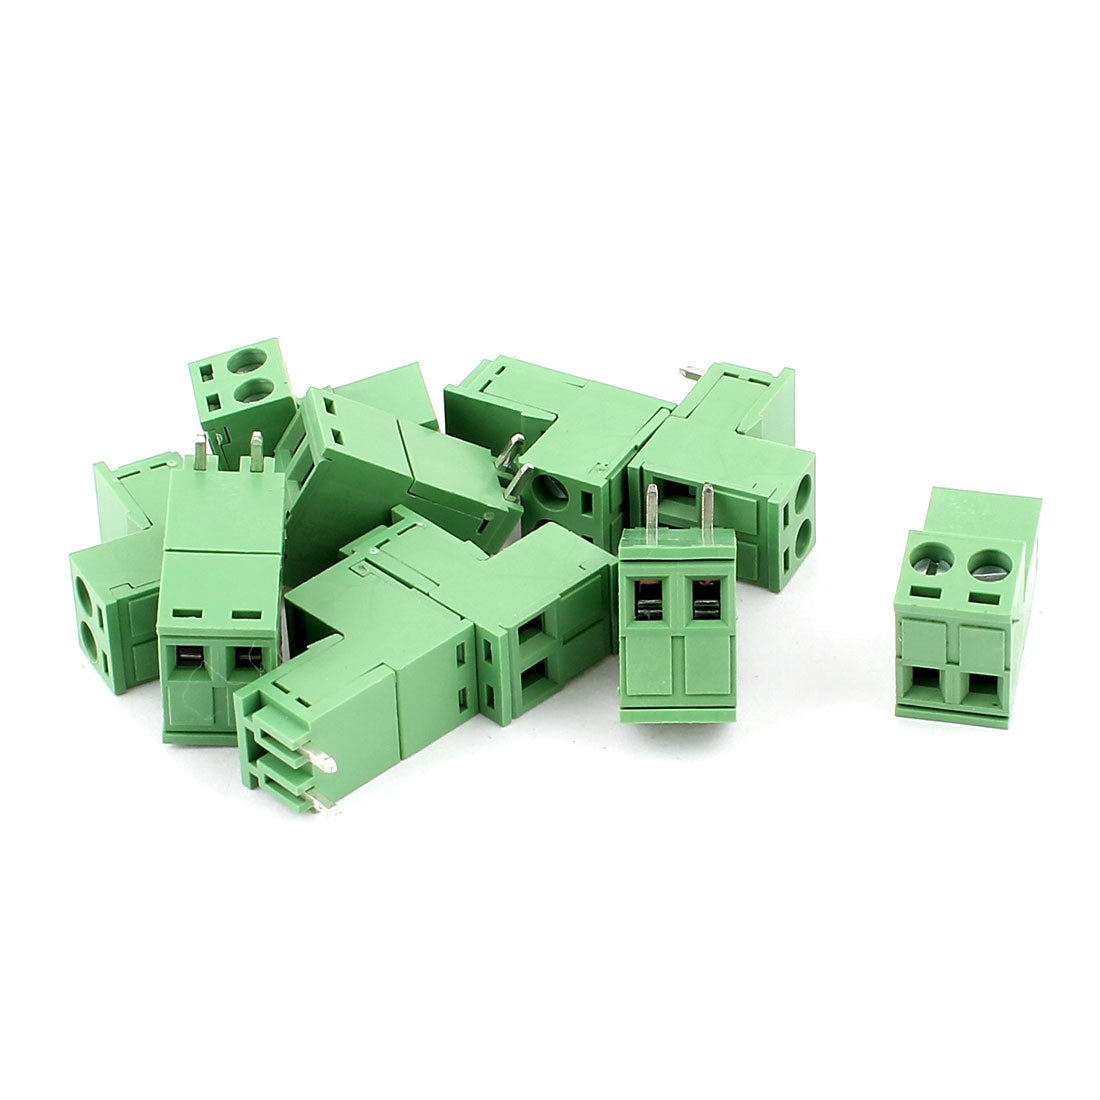 uxcell Uxcell 10 Pcs AC 300V 10A PCB Screw Terminal Block Connector 5.08mm Pitch Green